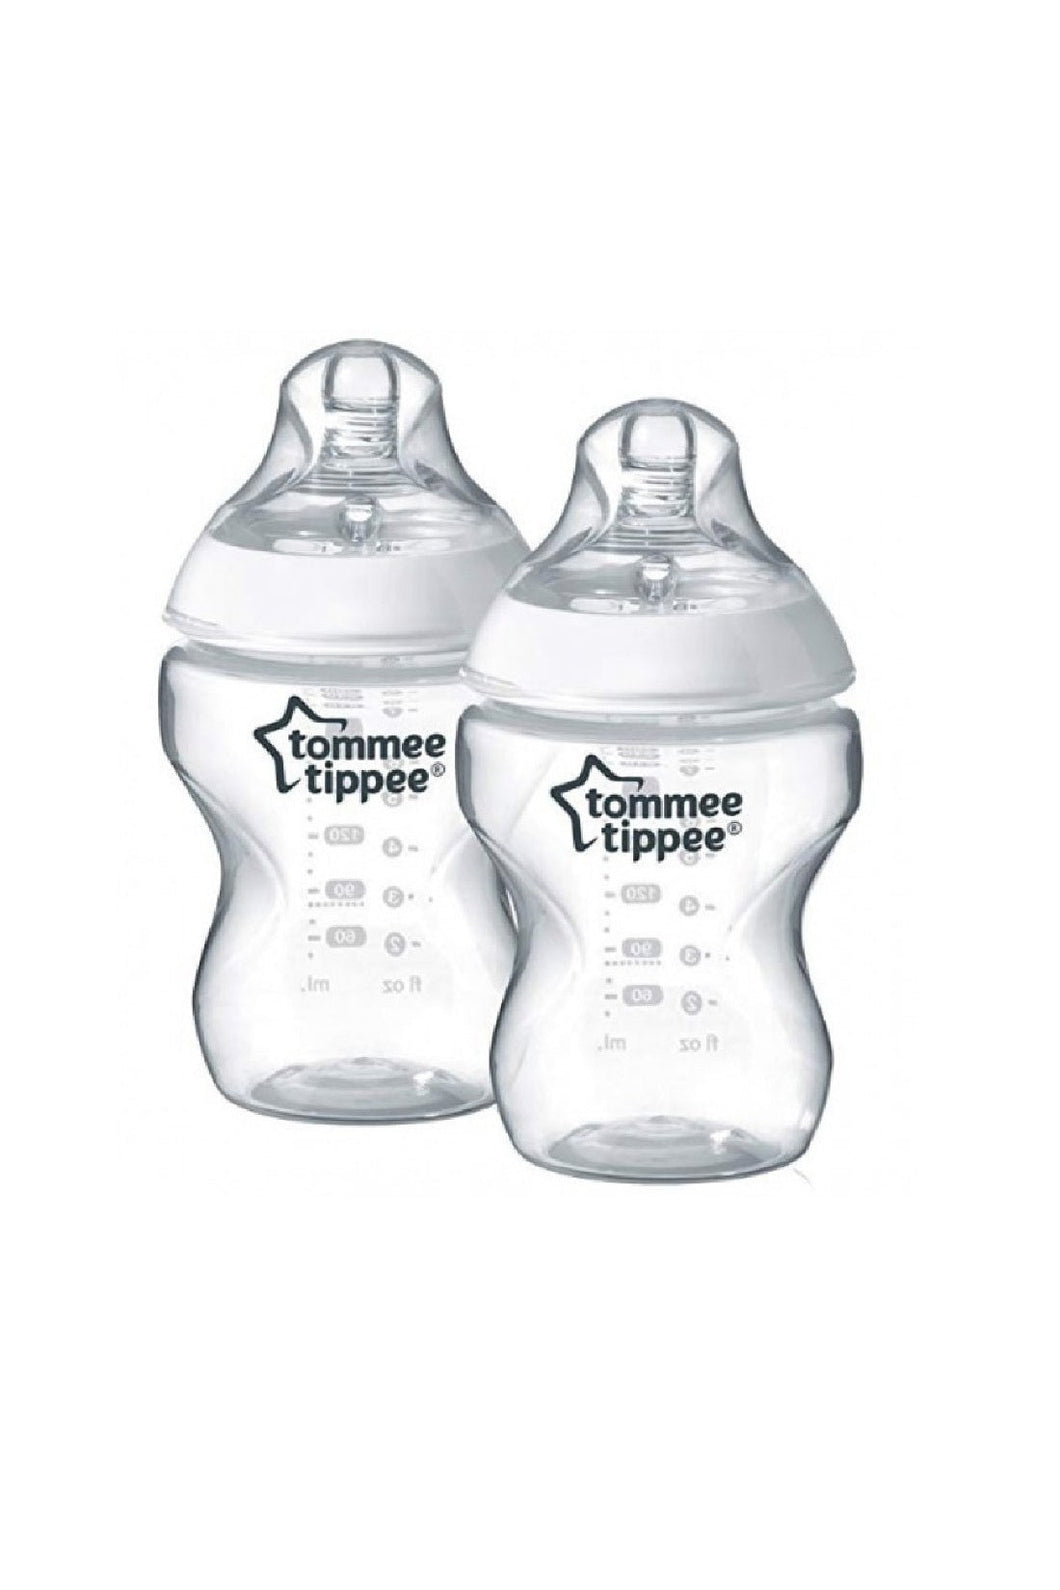 Tommee Tippee Closer To Nature Ppsu Milk Bottle 260Ml 2 Pack